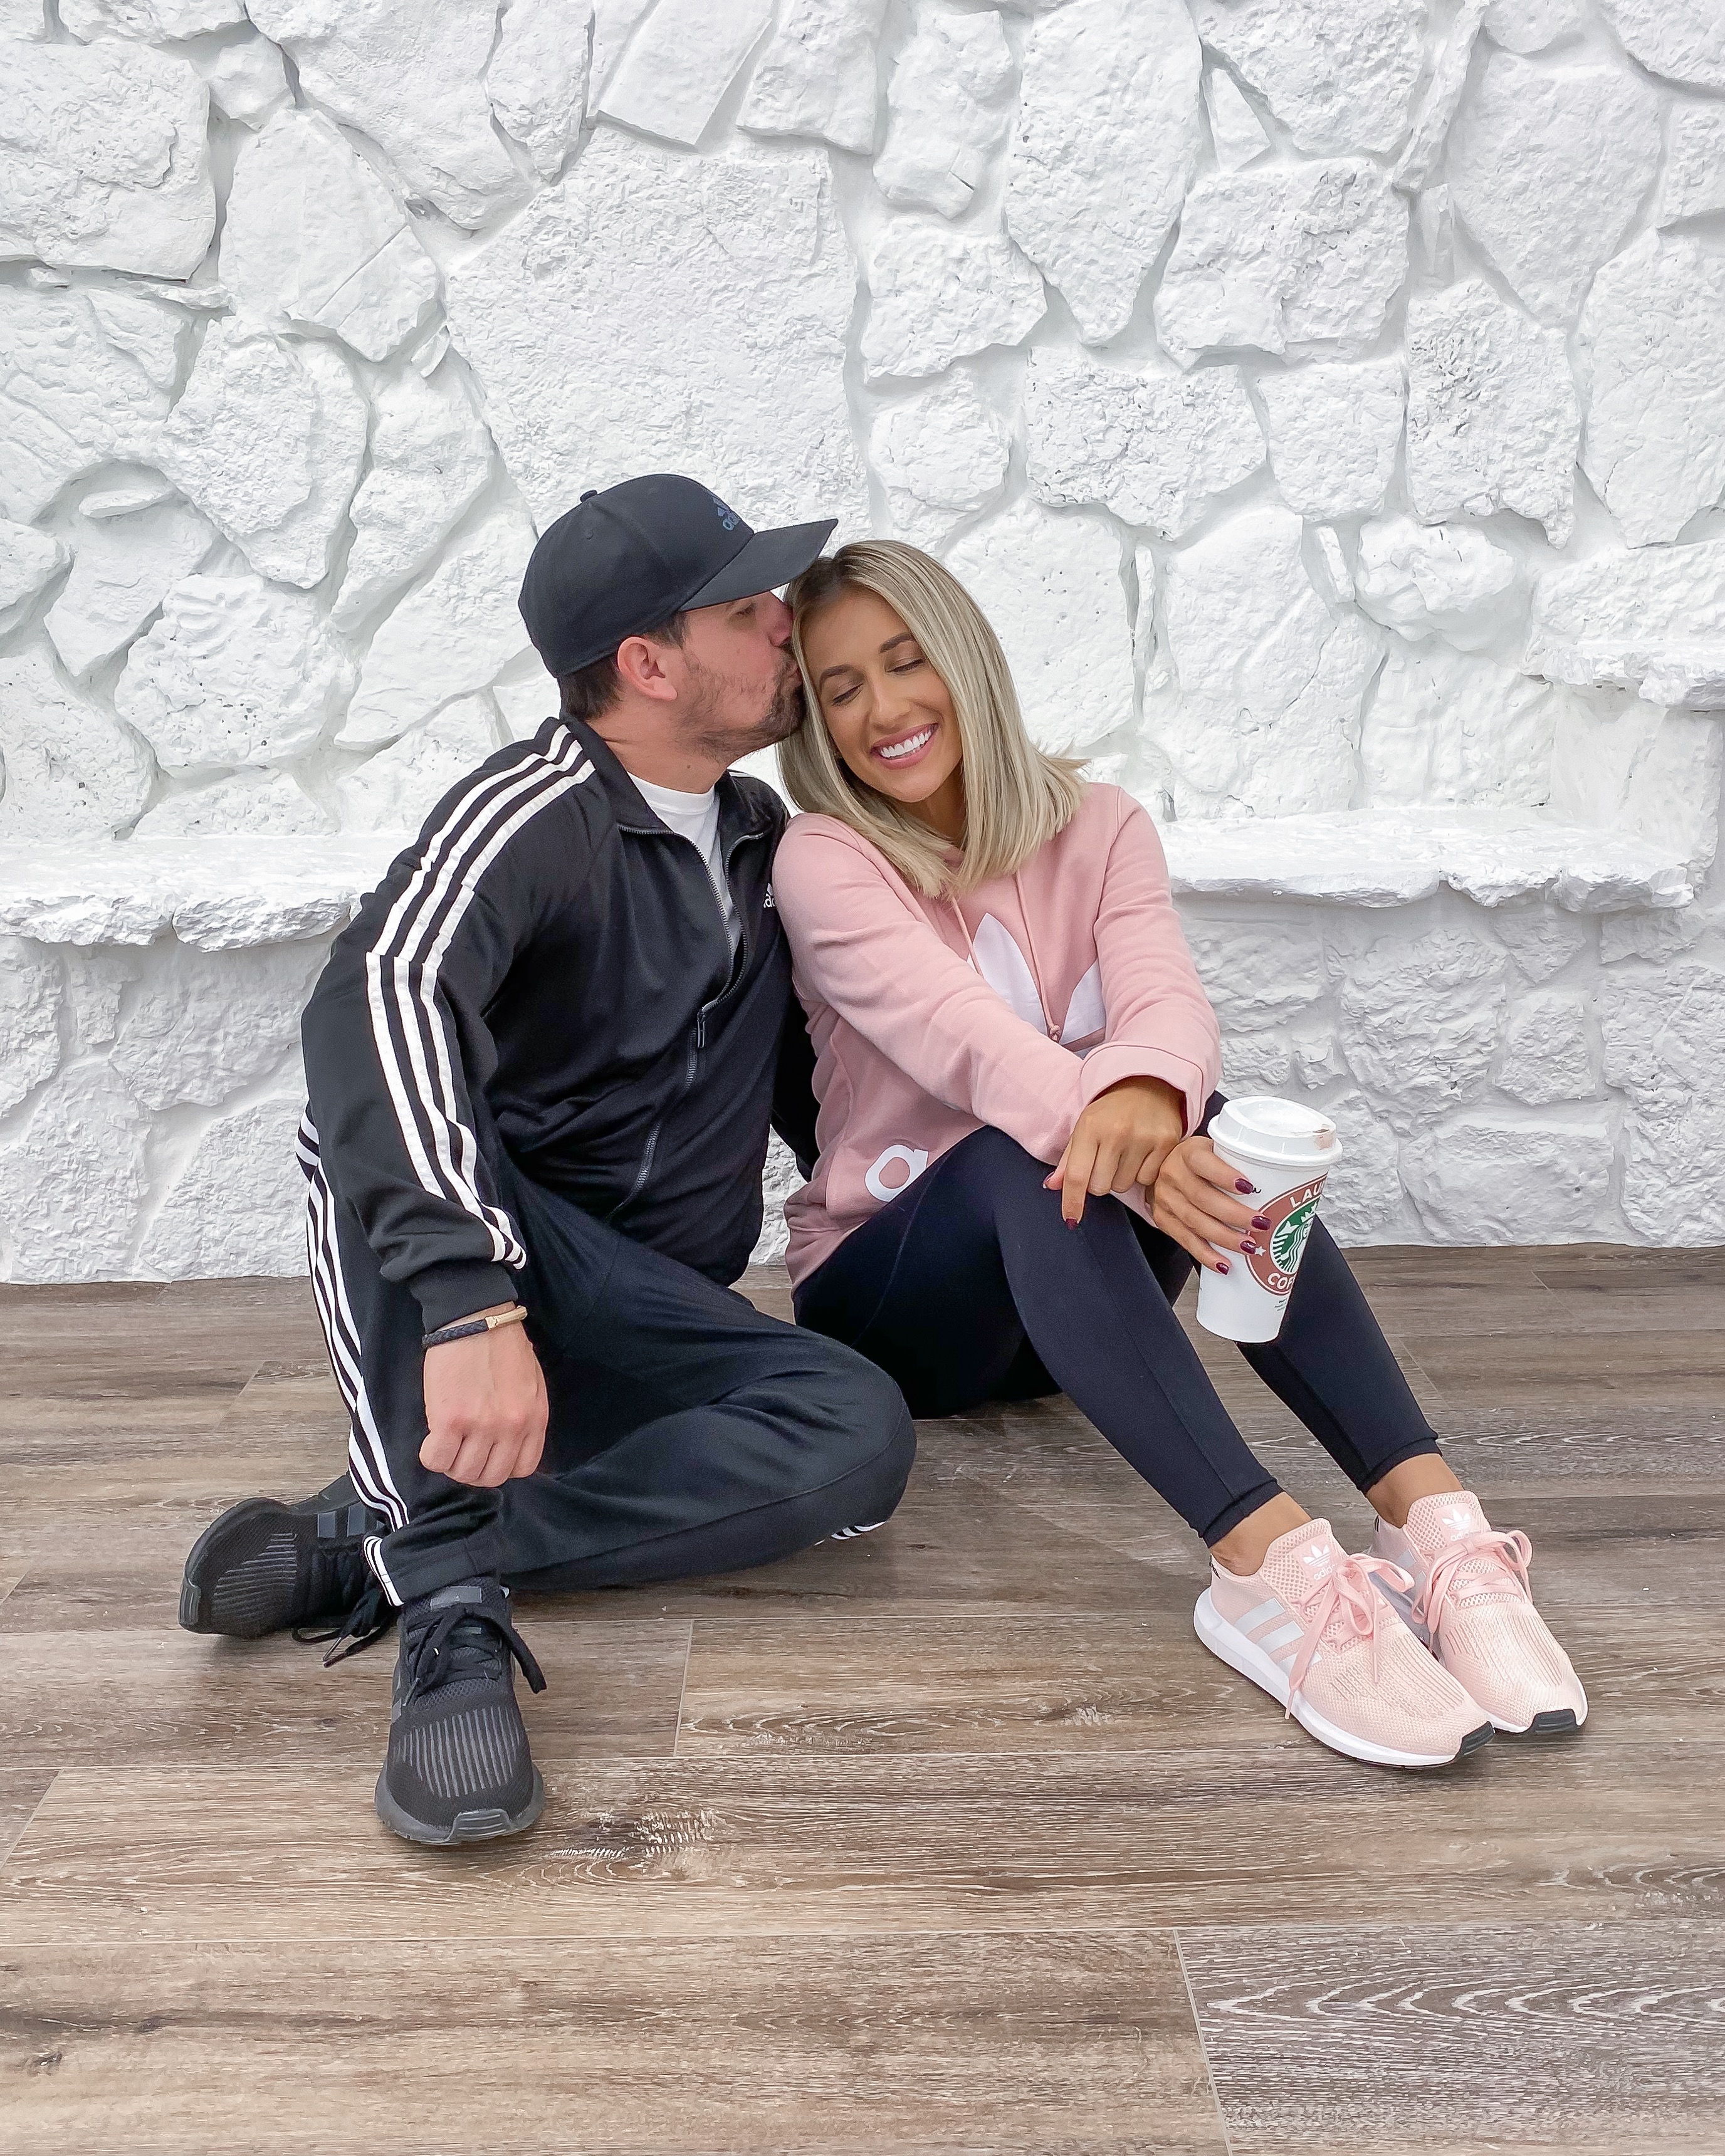 Laura Beverlin house pink adidas his and hers adidas outfit 